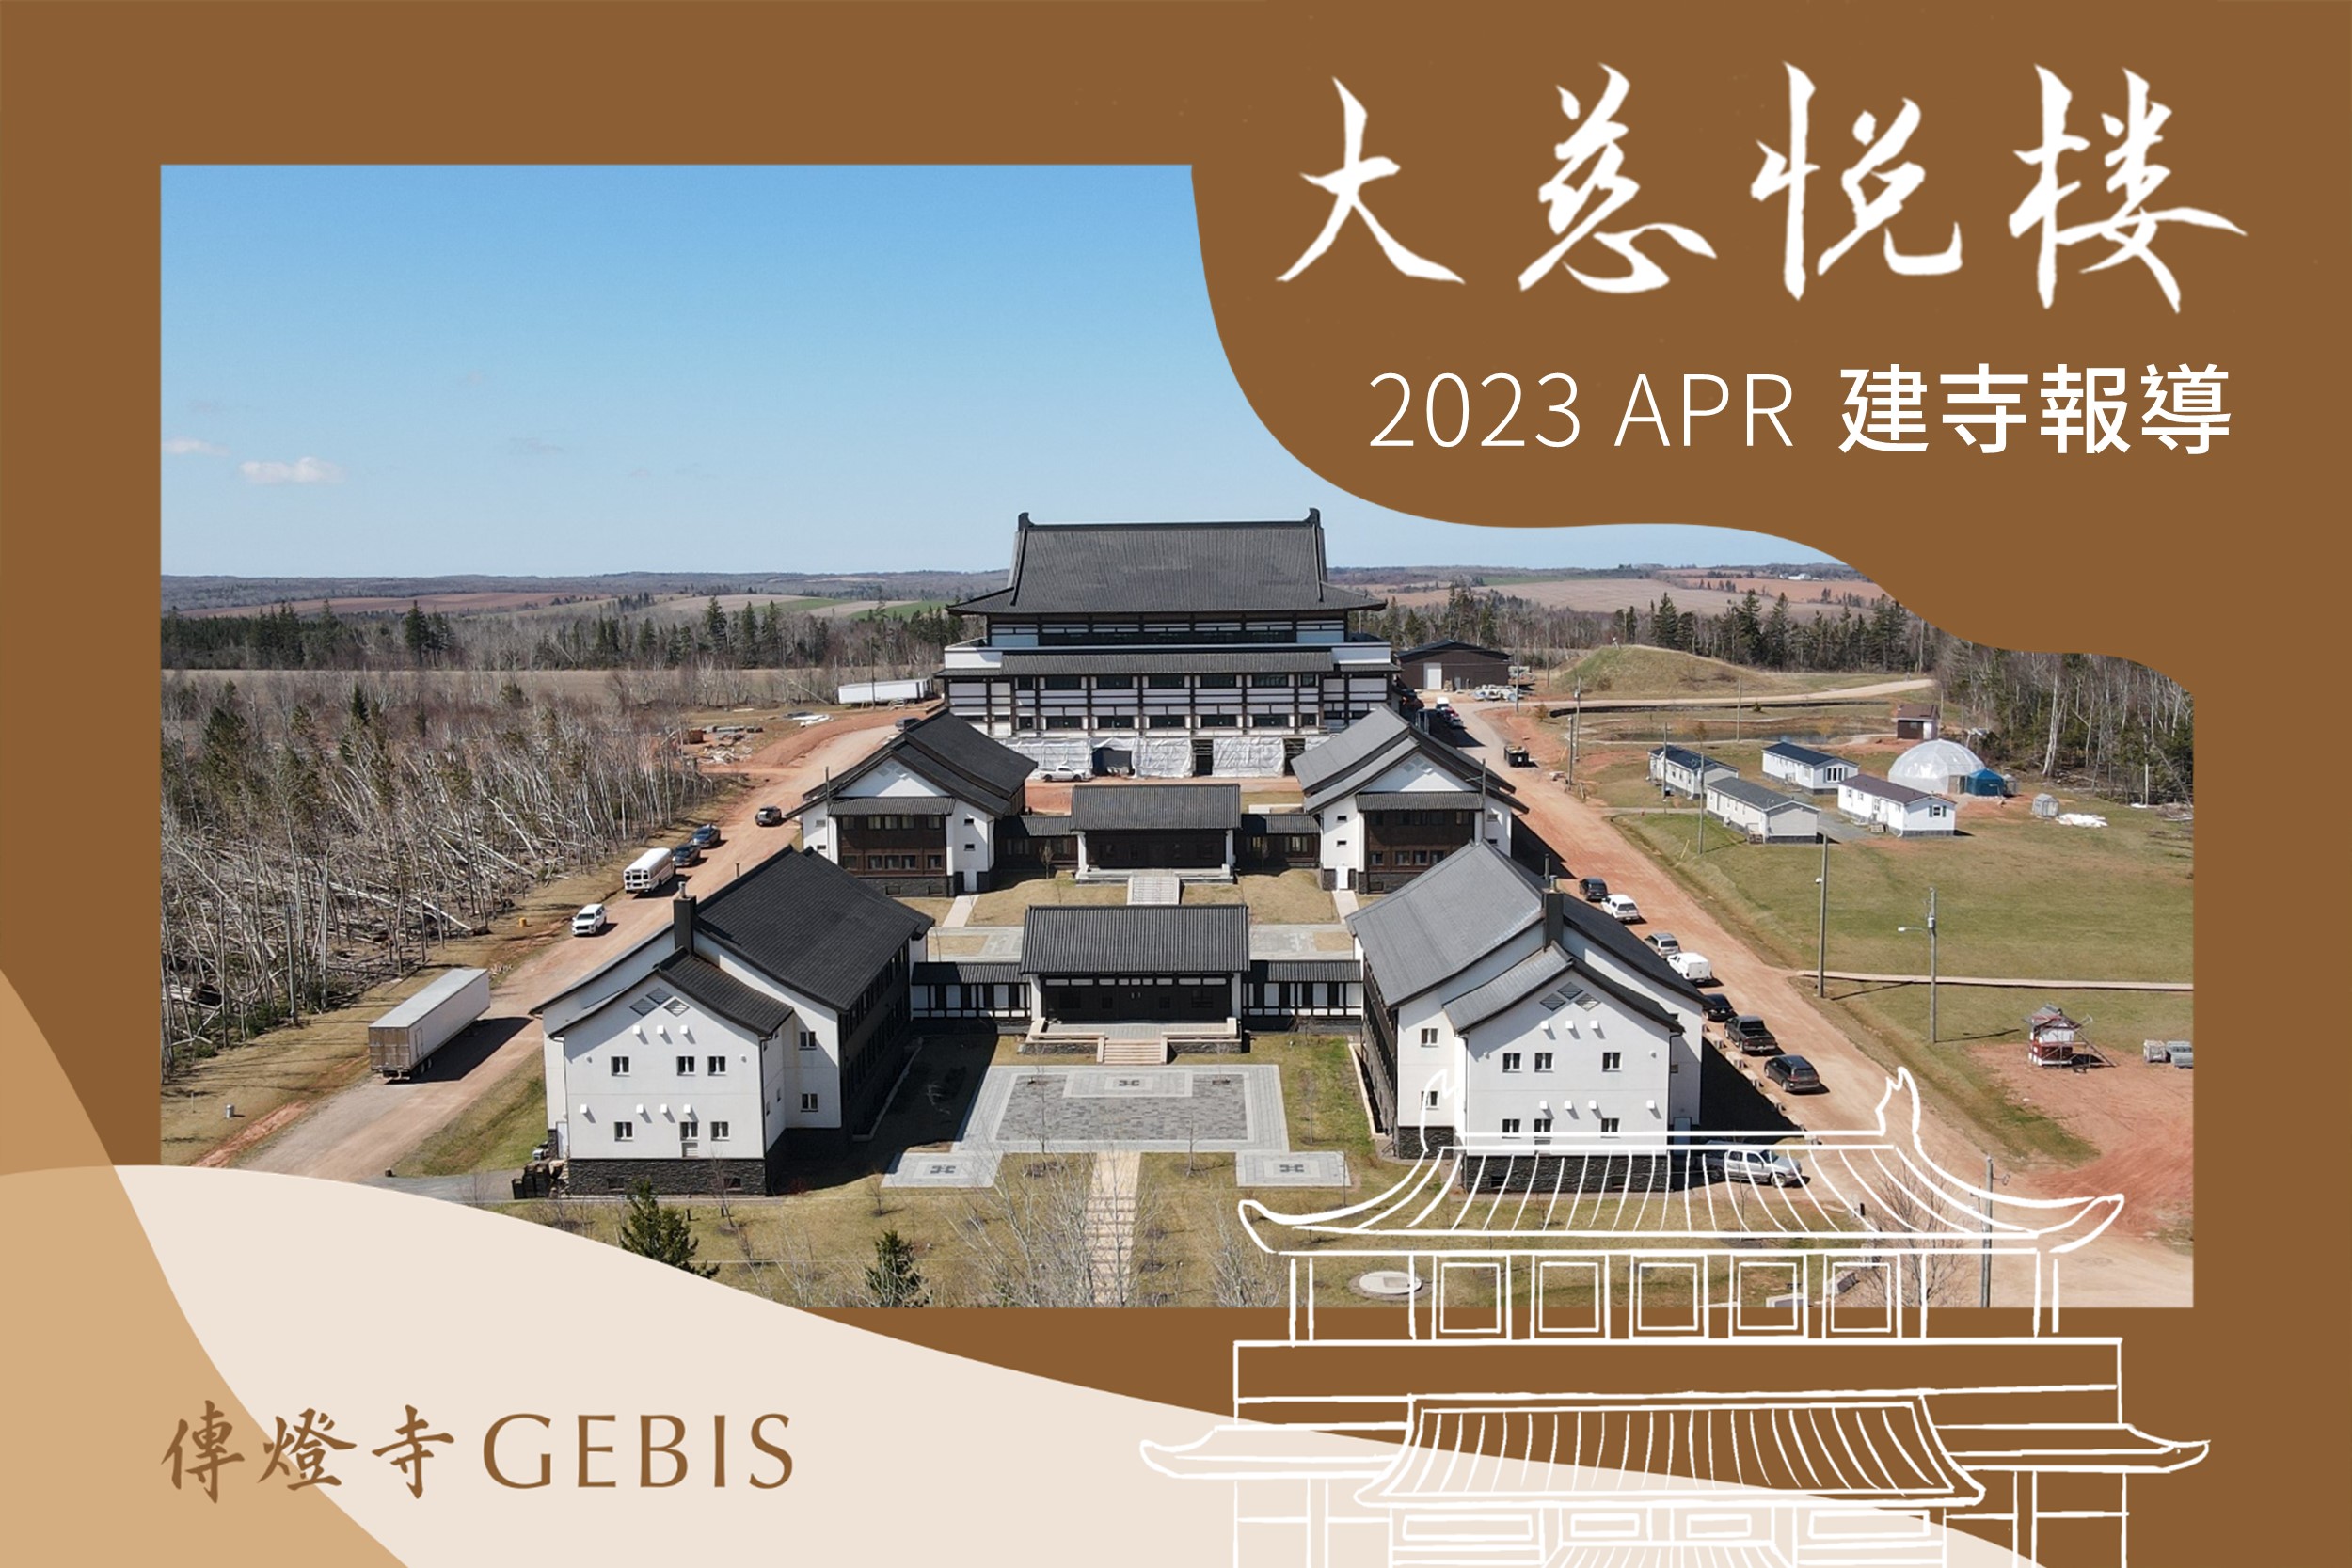 You are currently viewing 傳燈寺大慈悅樓：2023年4月建寺報導